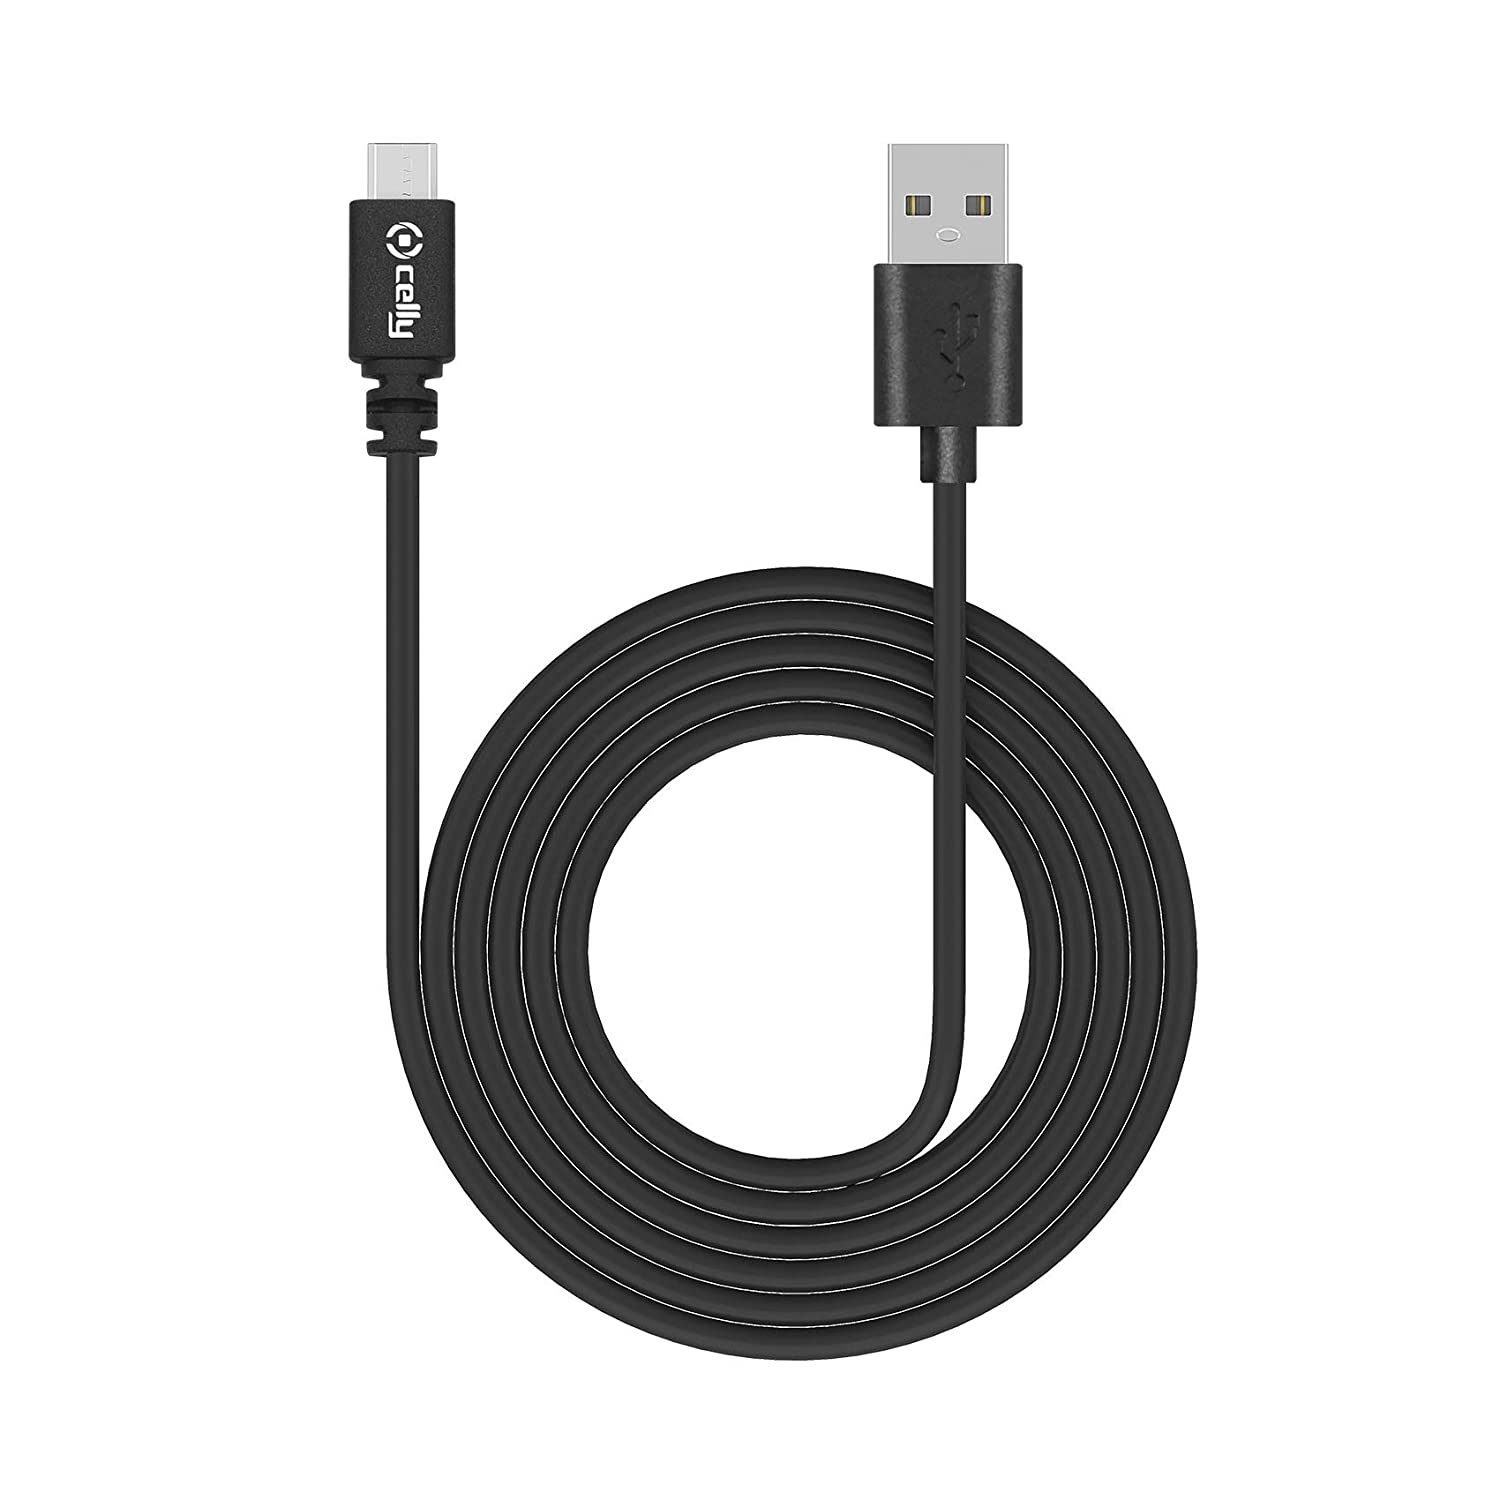 Celly Micro USB Smartphone Data Cable